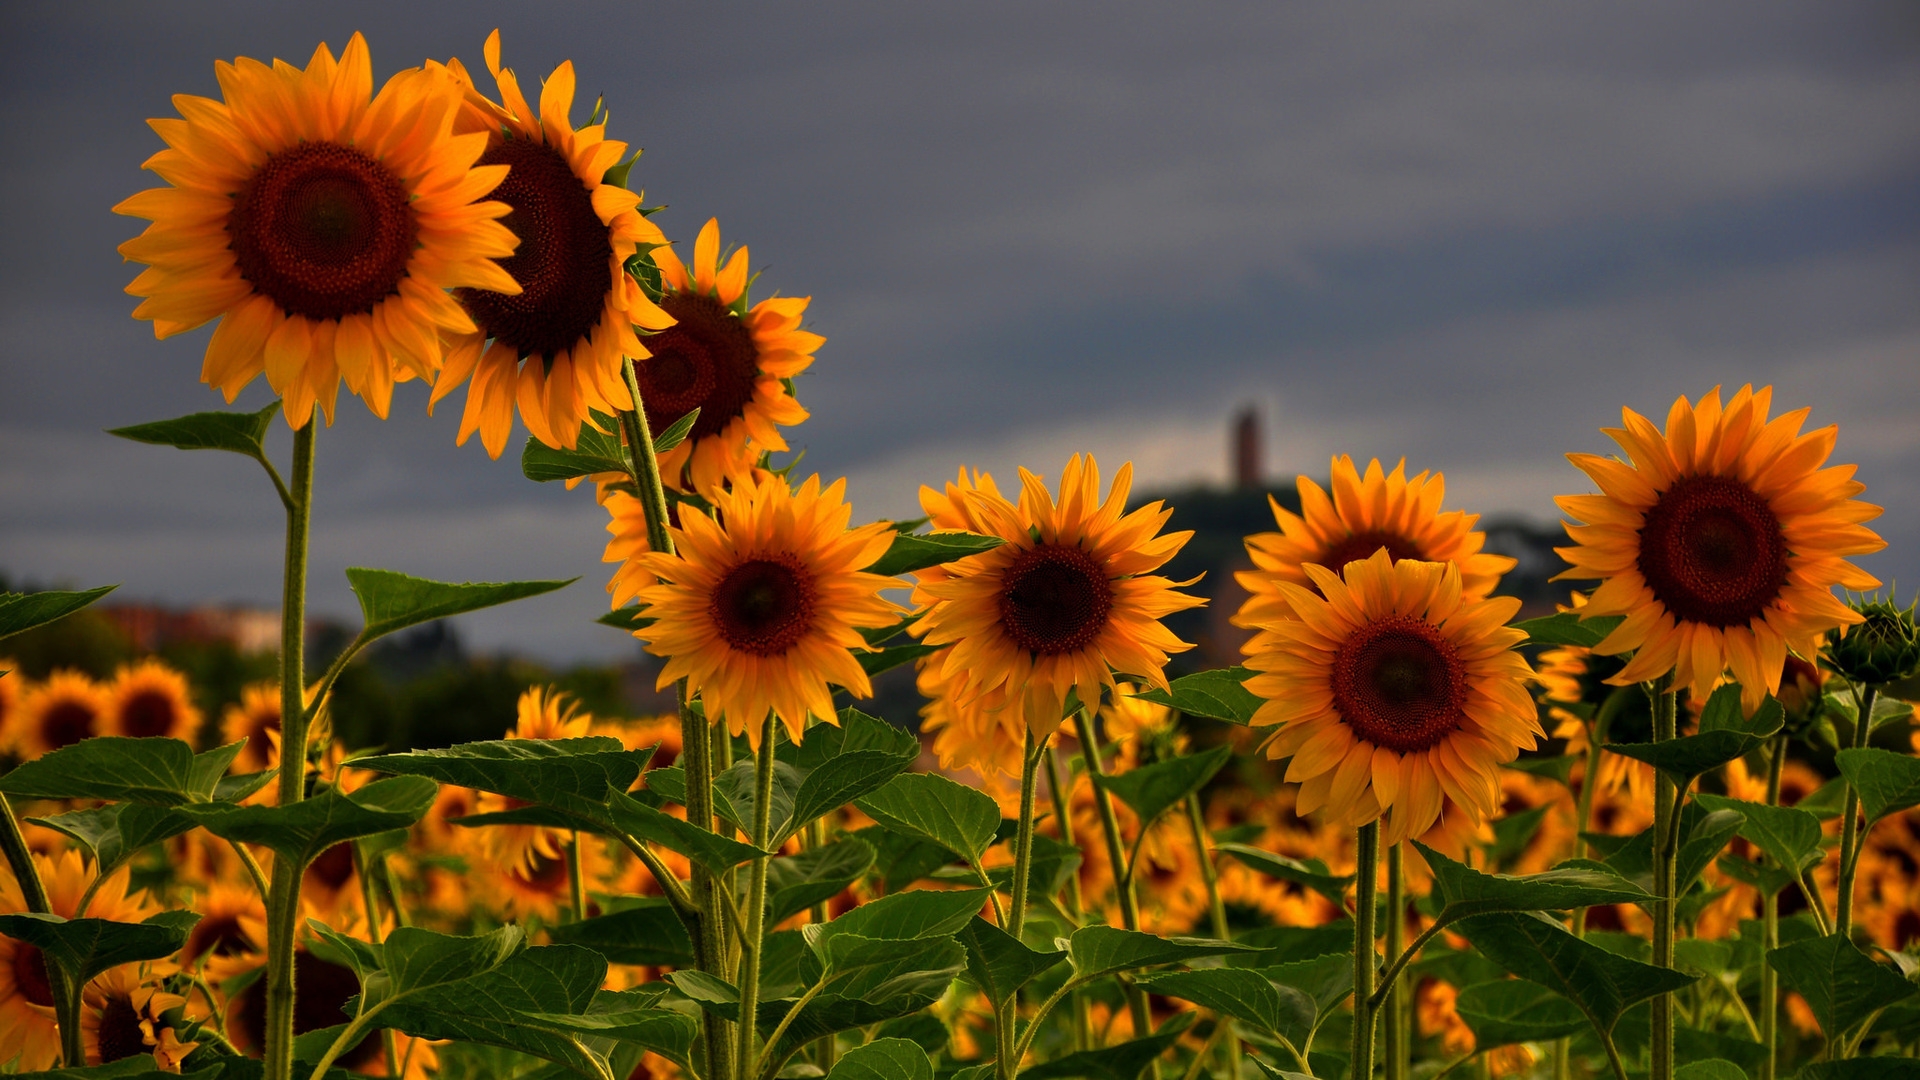 Sunflowers Field for 1920 x 1080 HDTV 1080p resolution